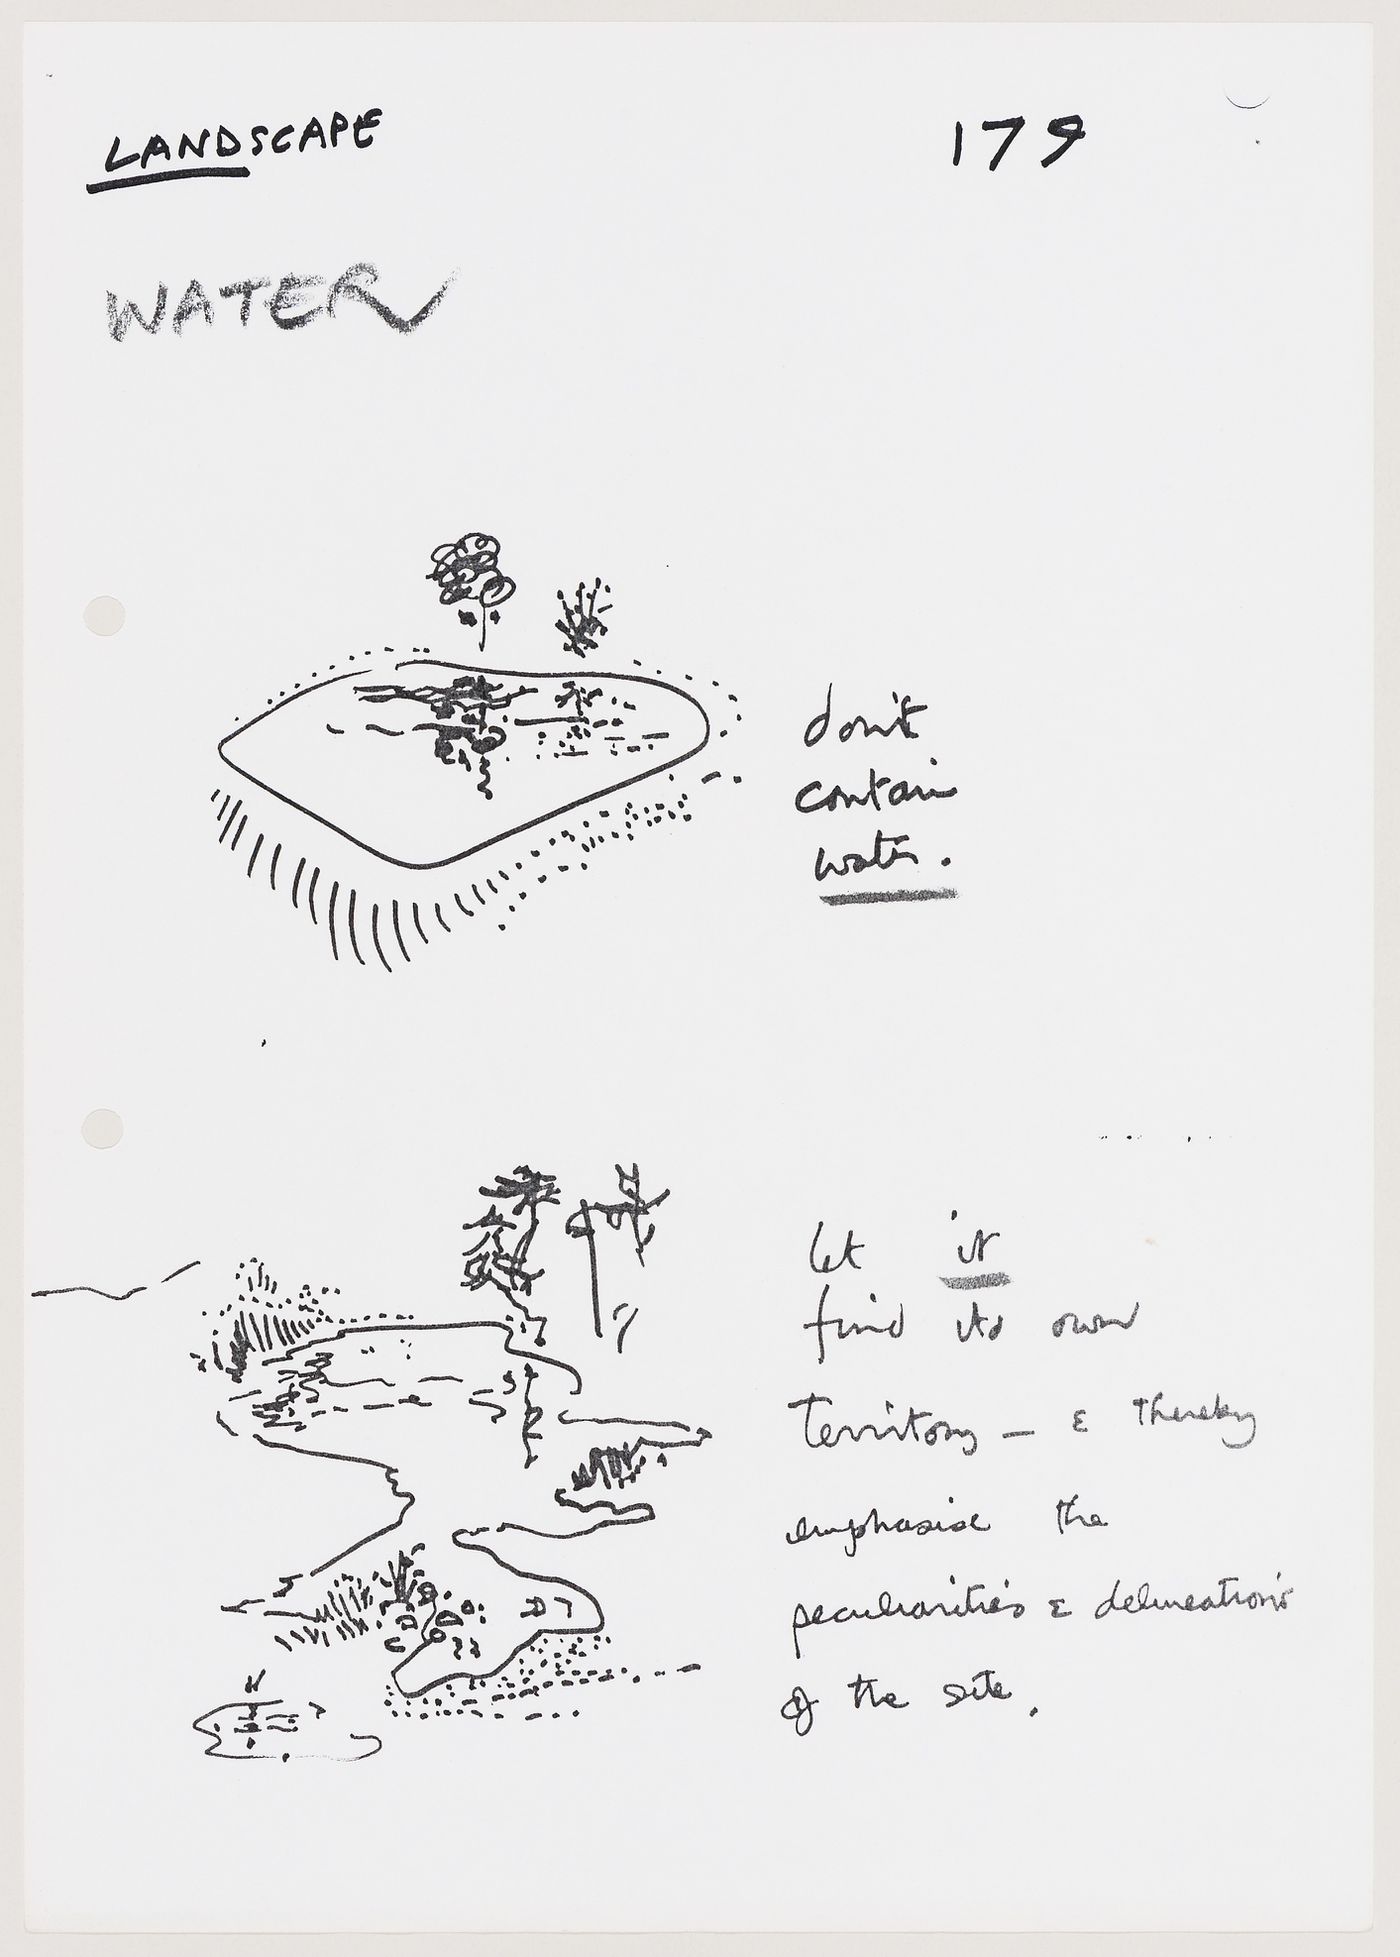 Ski: sketches and notes on water in the design of the landscape